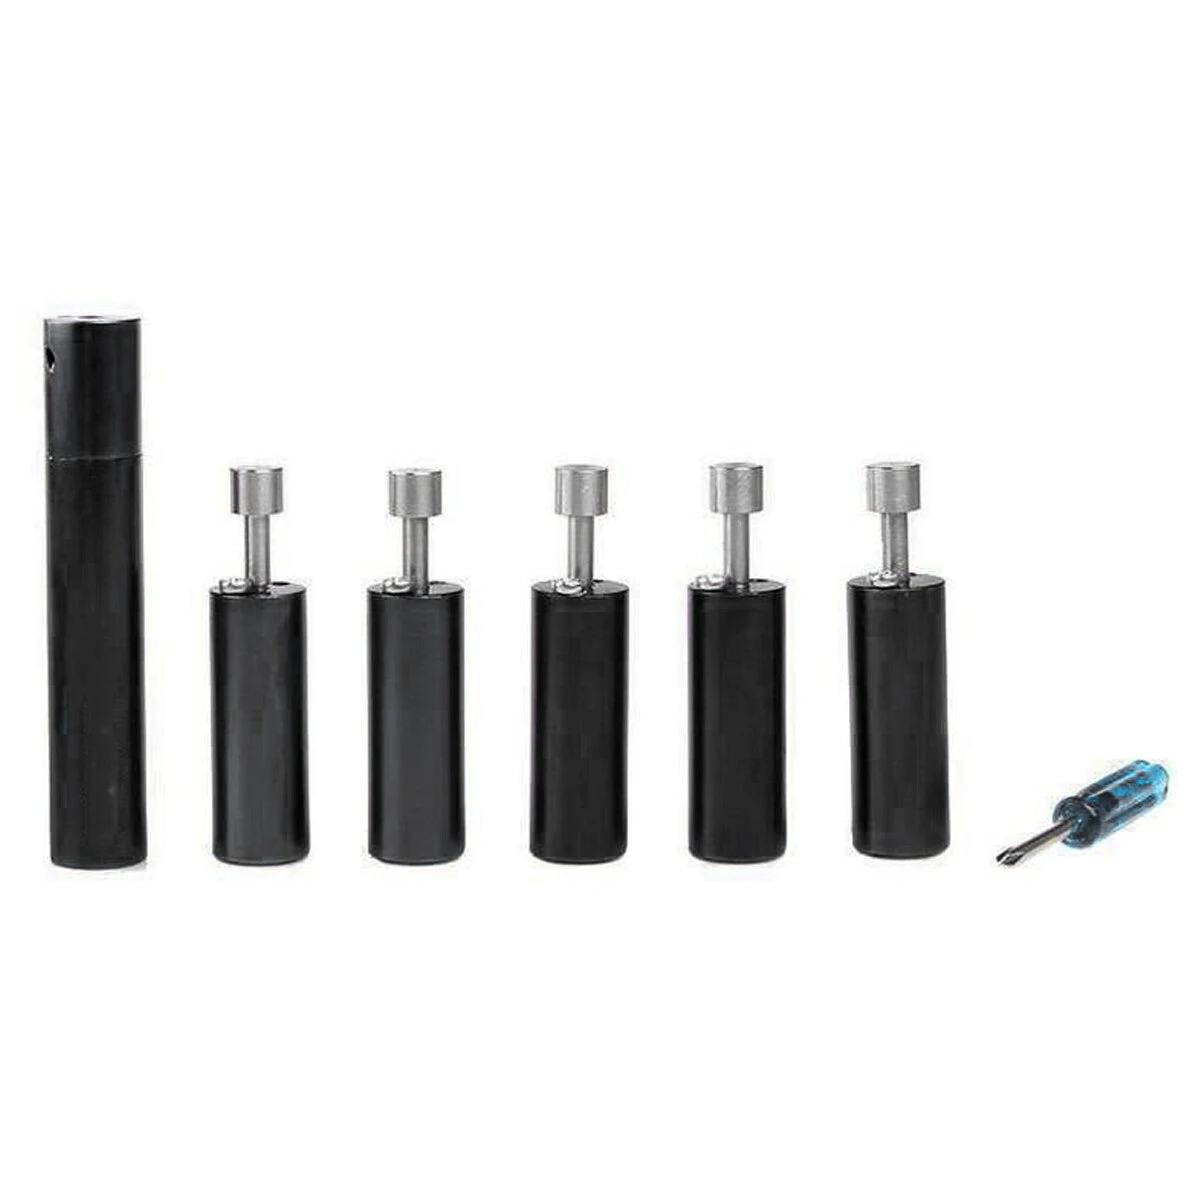 5 in 1 coil wire winder kit electronic cigarette atomizers tools with screwdriver